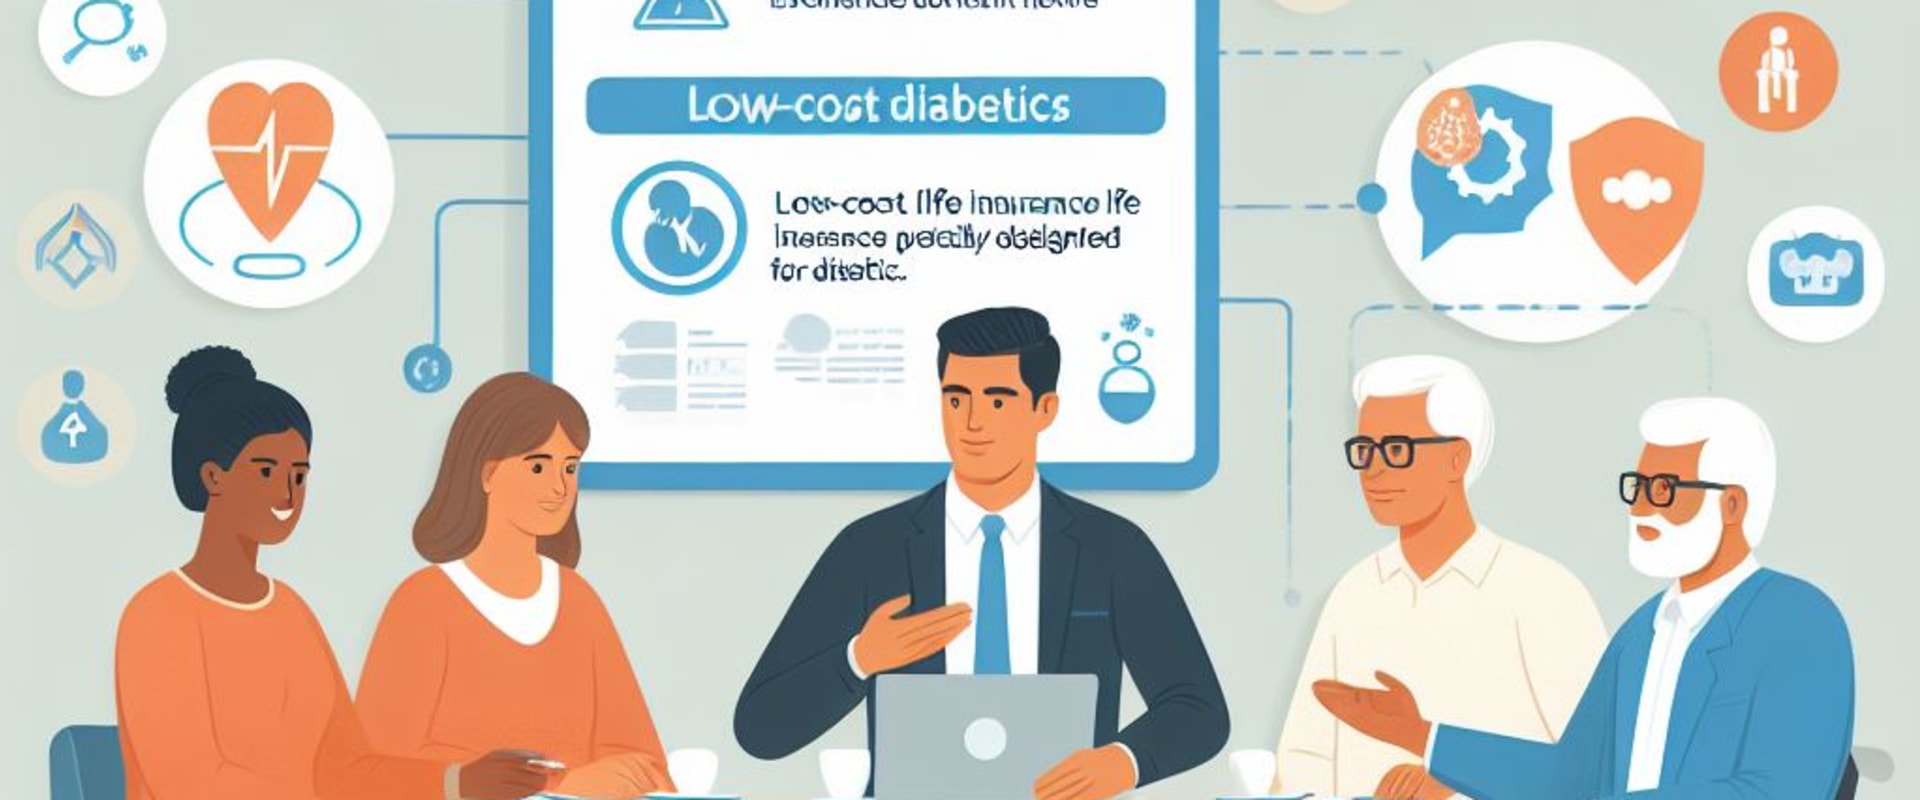 low cost life insurance for diabetics